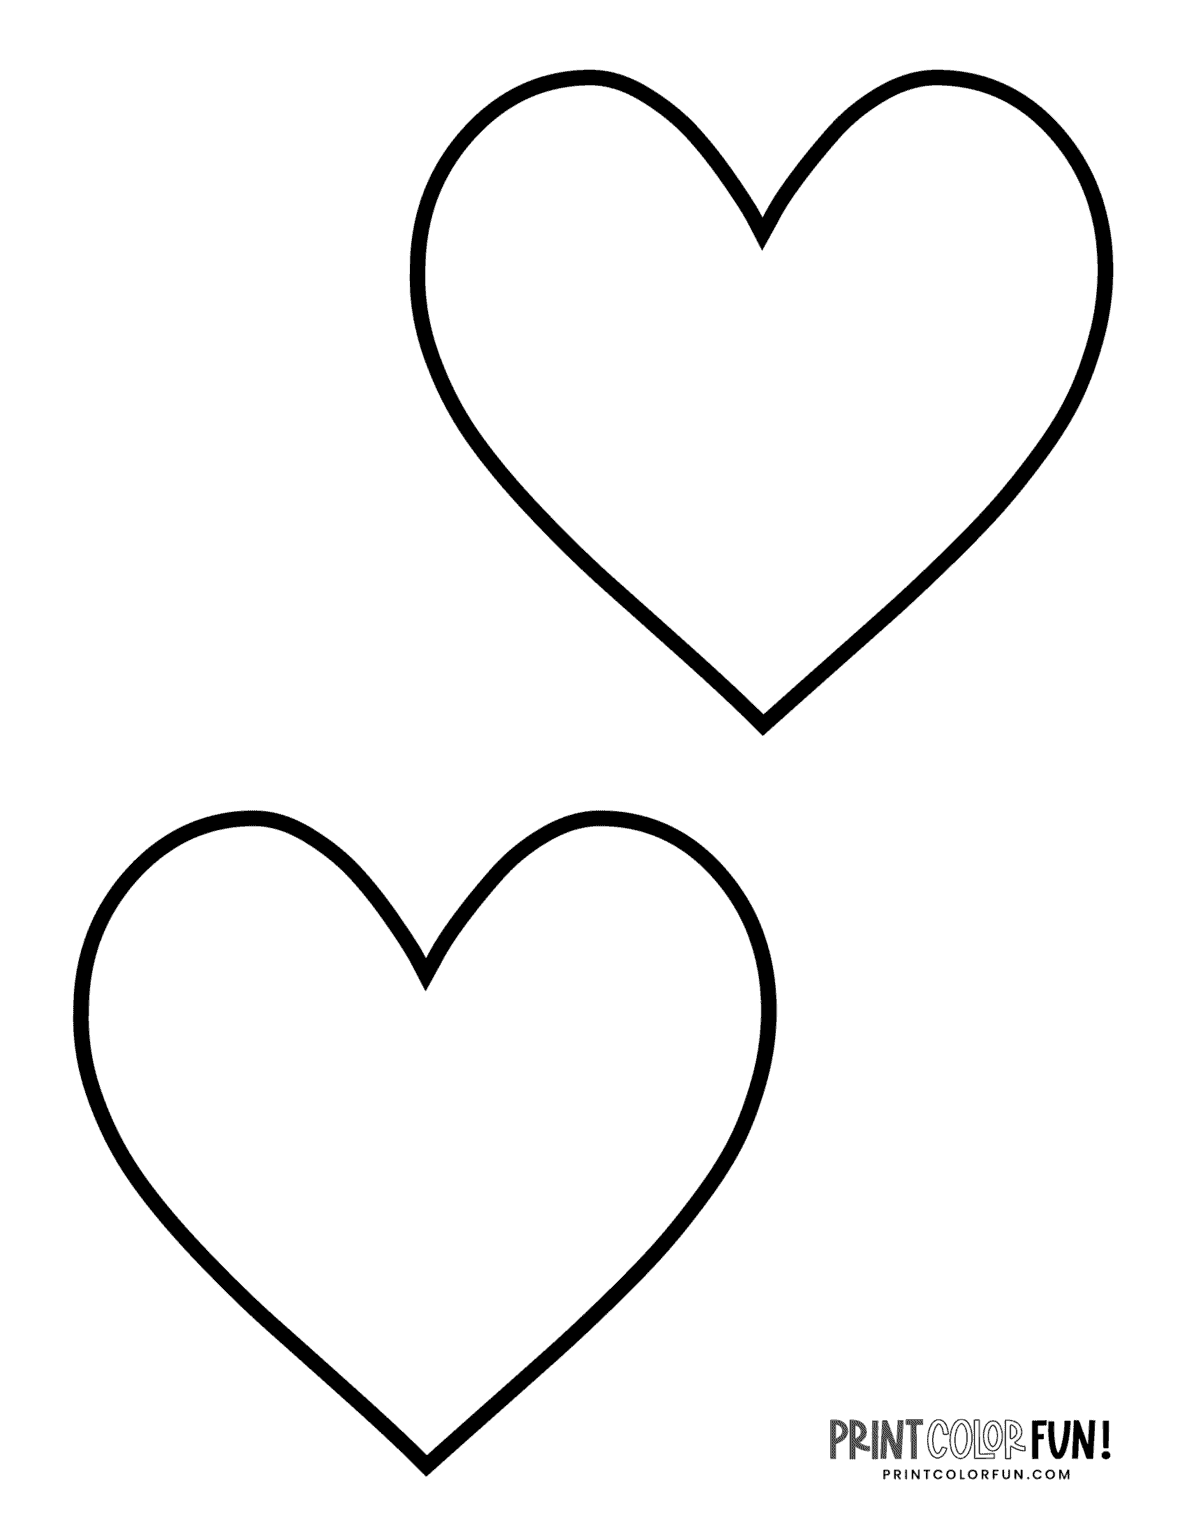 blank-heart-shape-coloring-pages-crafty-printables-print-color-fun